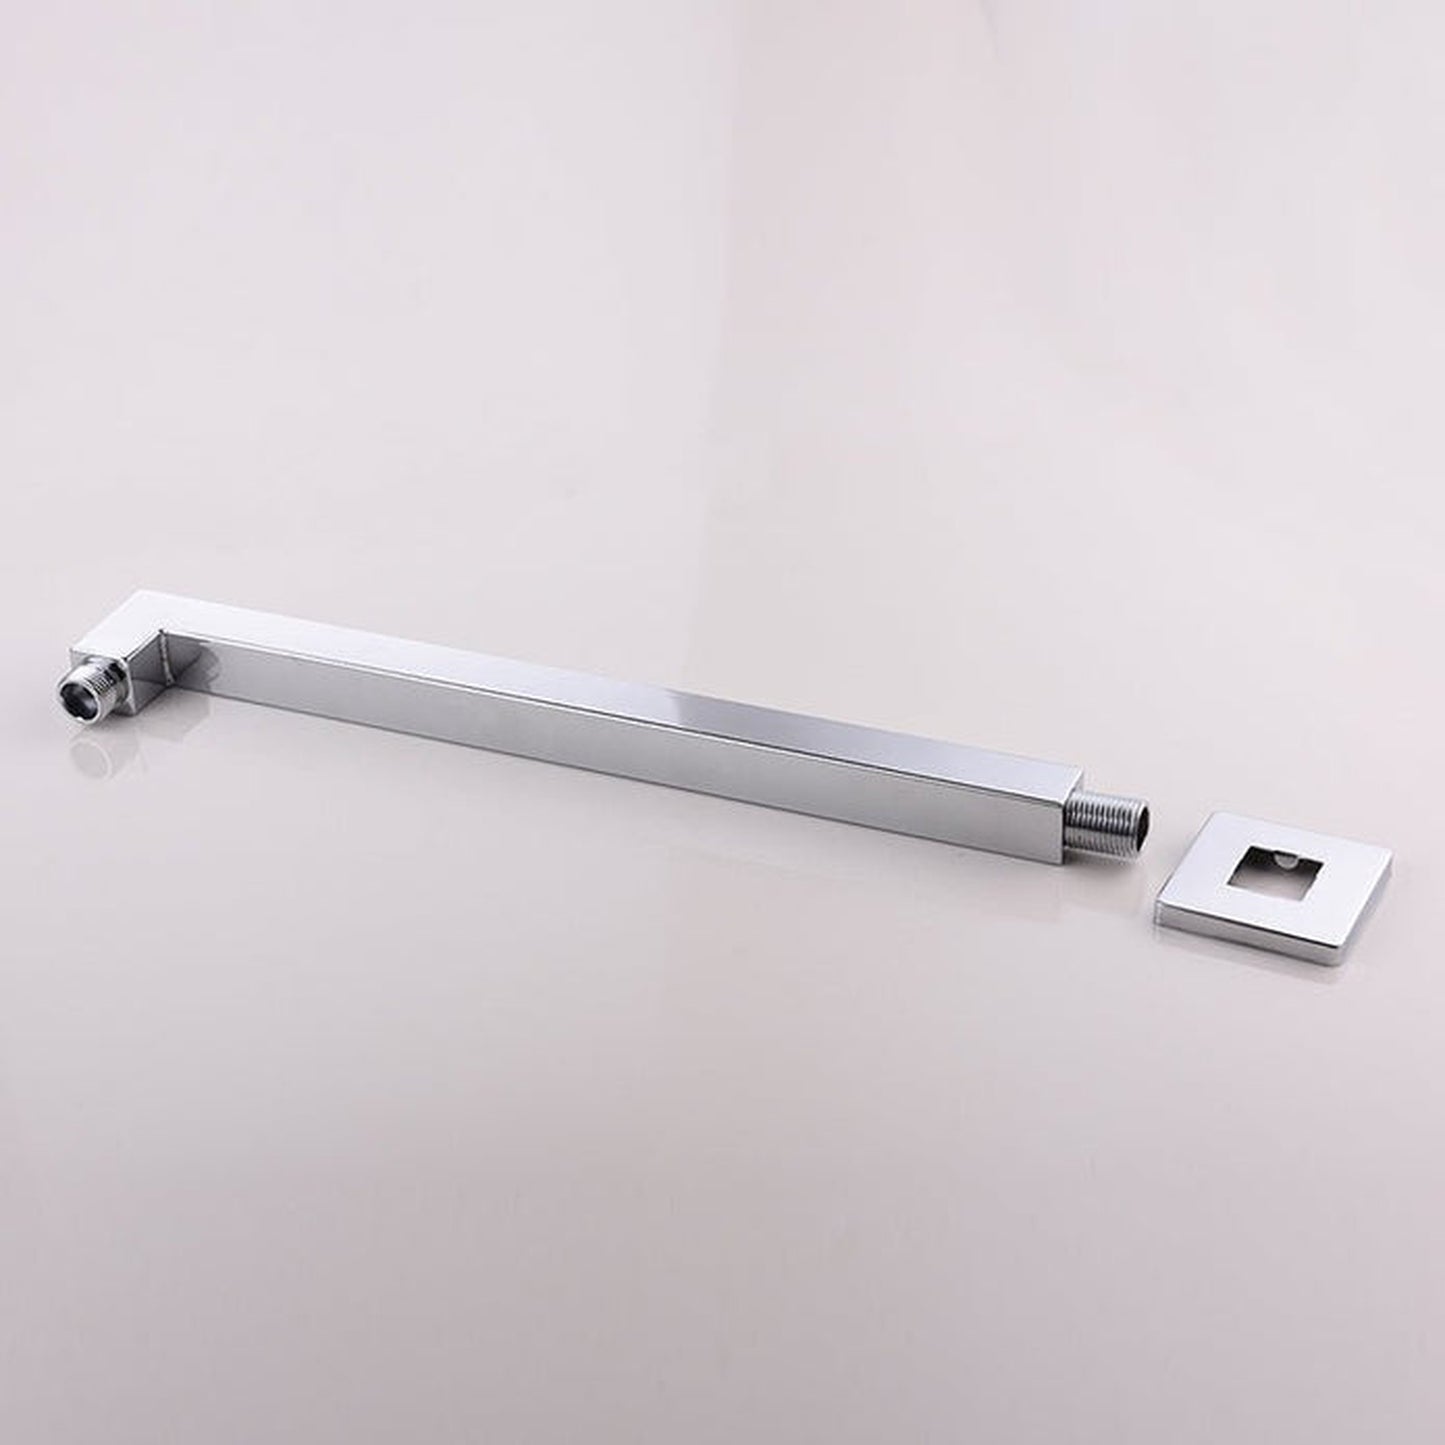 Vanity Art 9" Chrome Wall Mounted Shower Arm for Shower Head With Flange